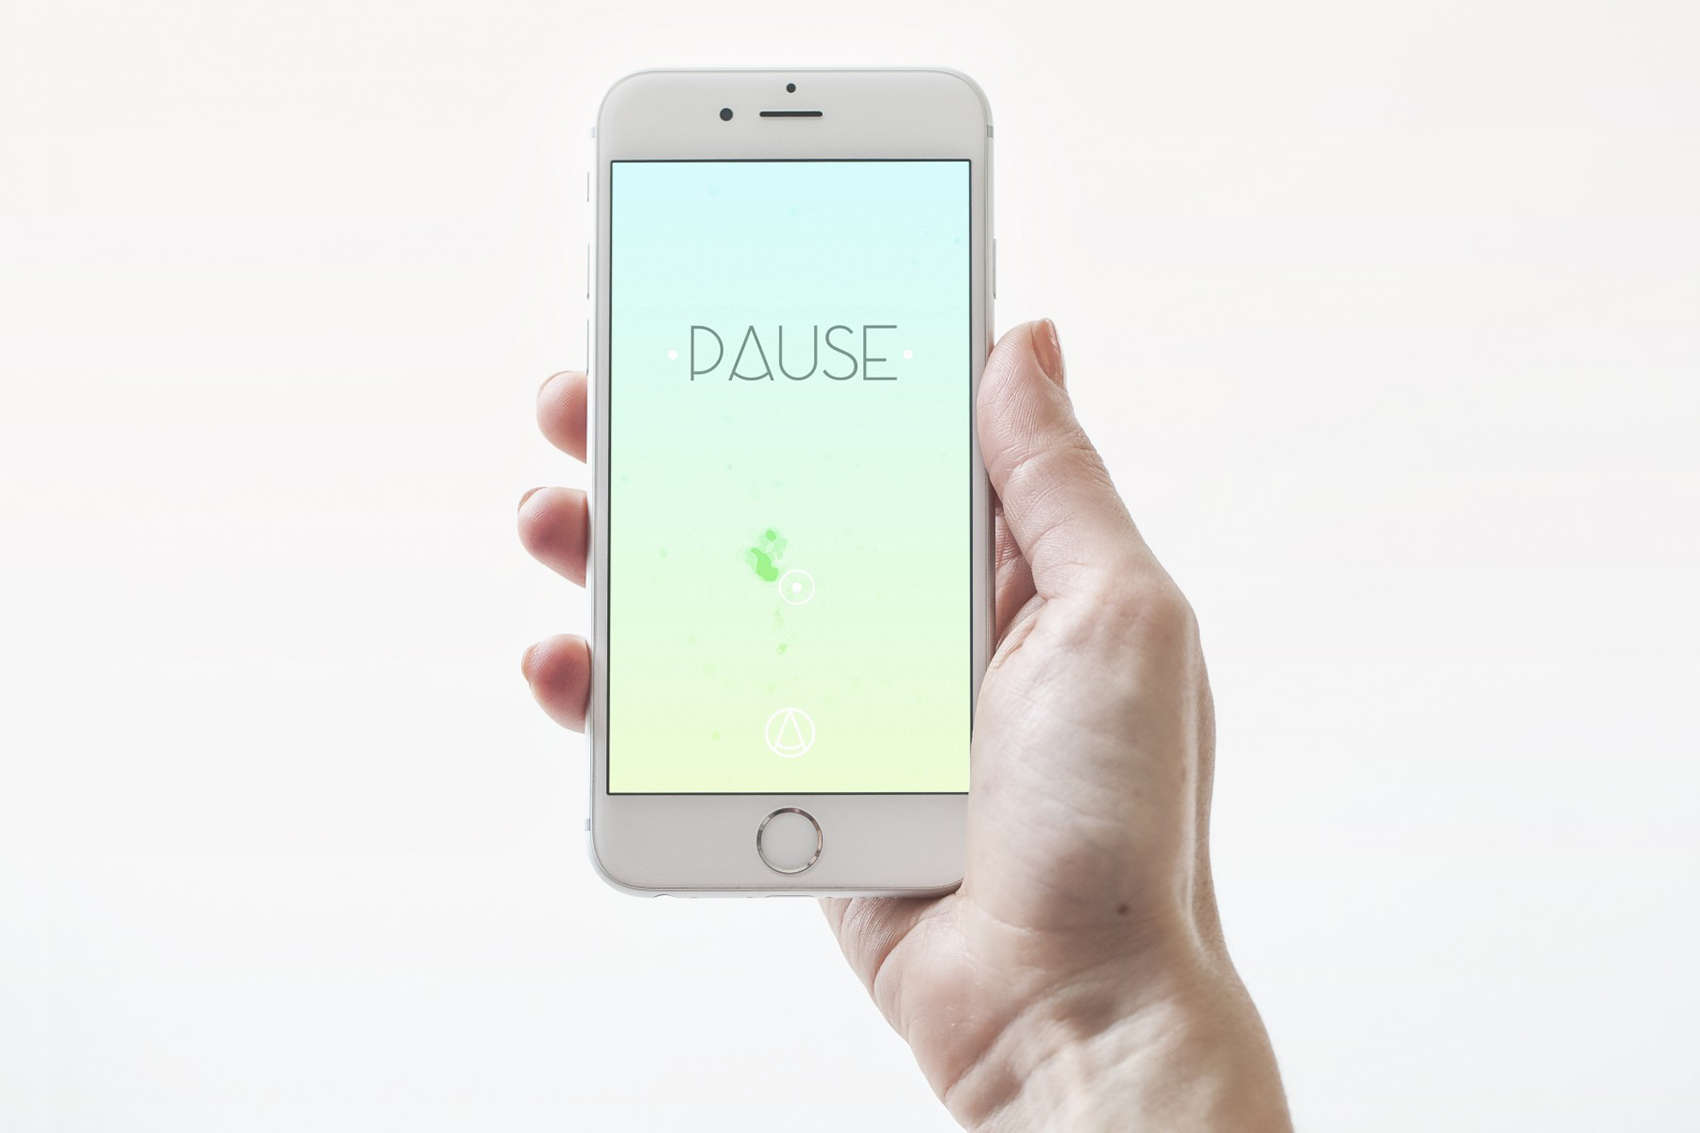 PAUSE is a guided meditation app that aims to get you to relax and refocus.